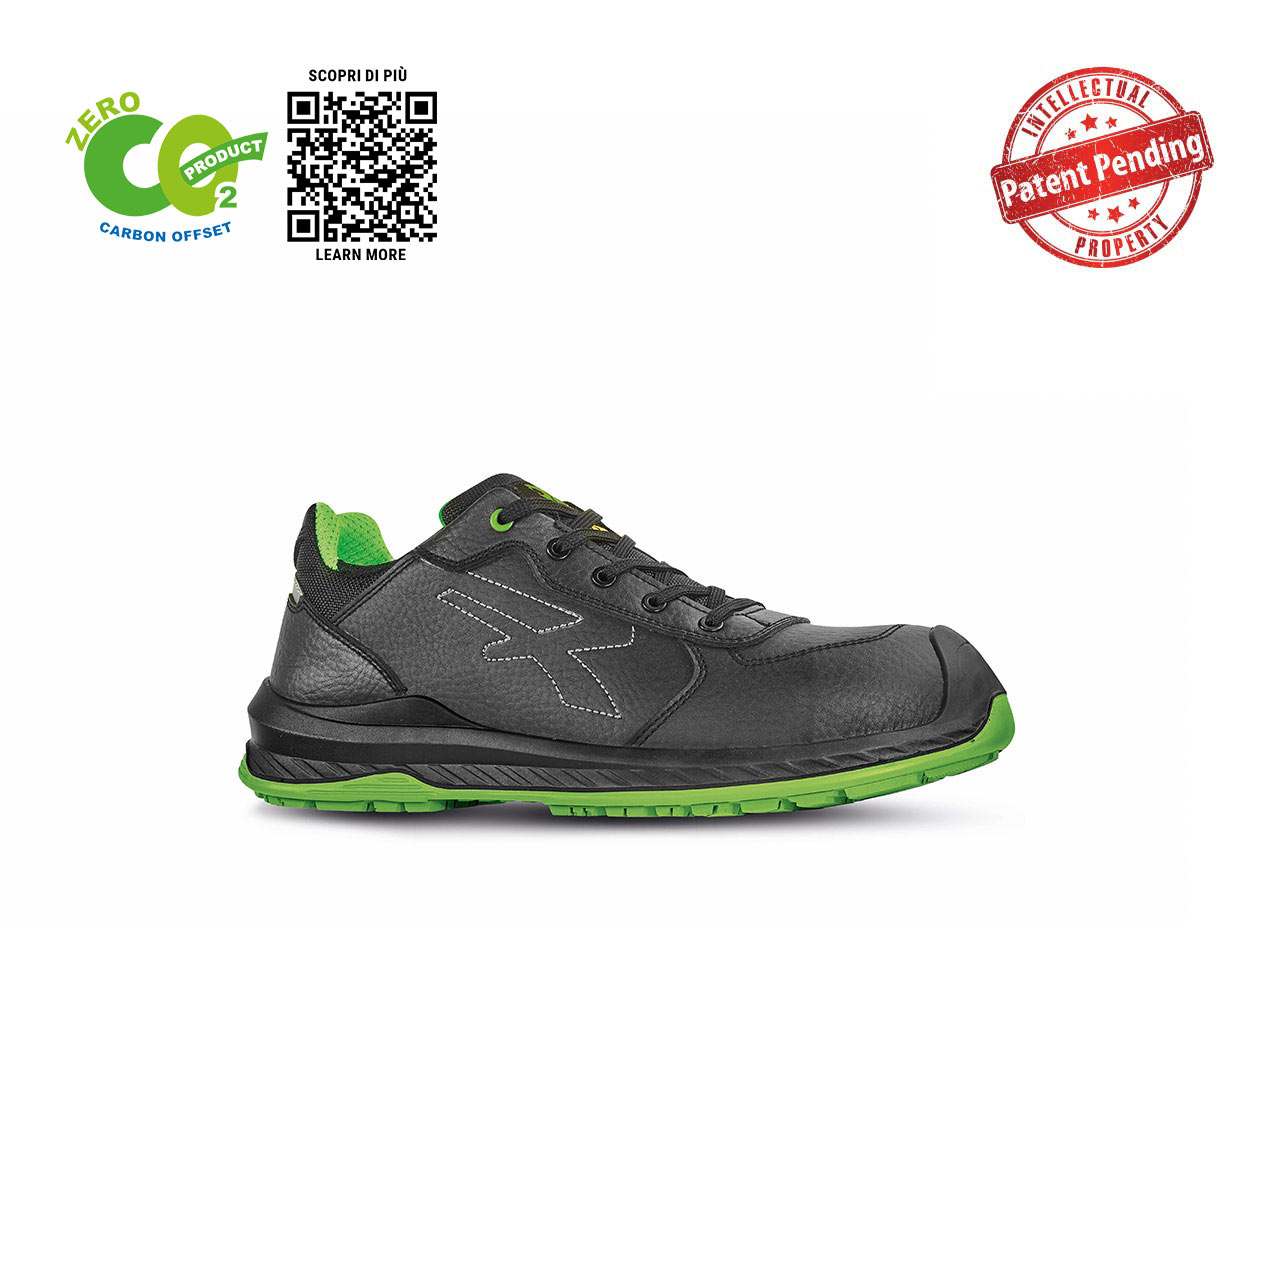 scarpa antinfortunistica upower modello natural linea red industry green vista laterale